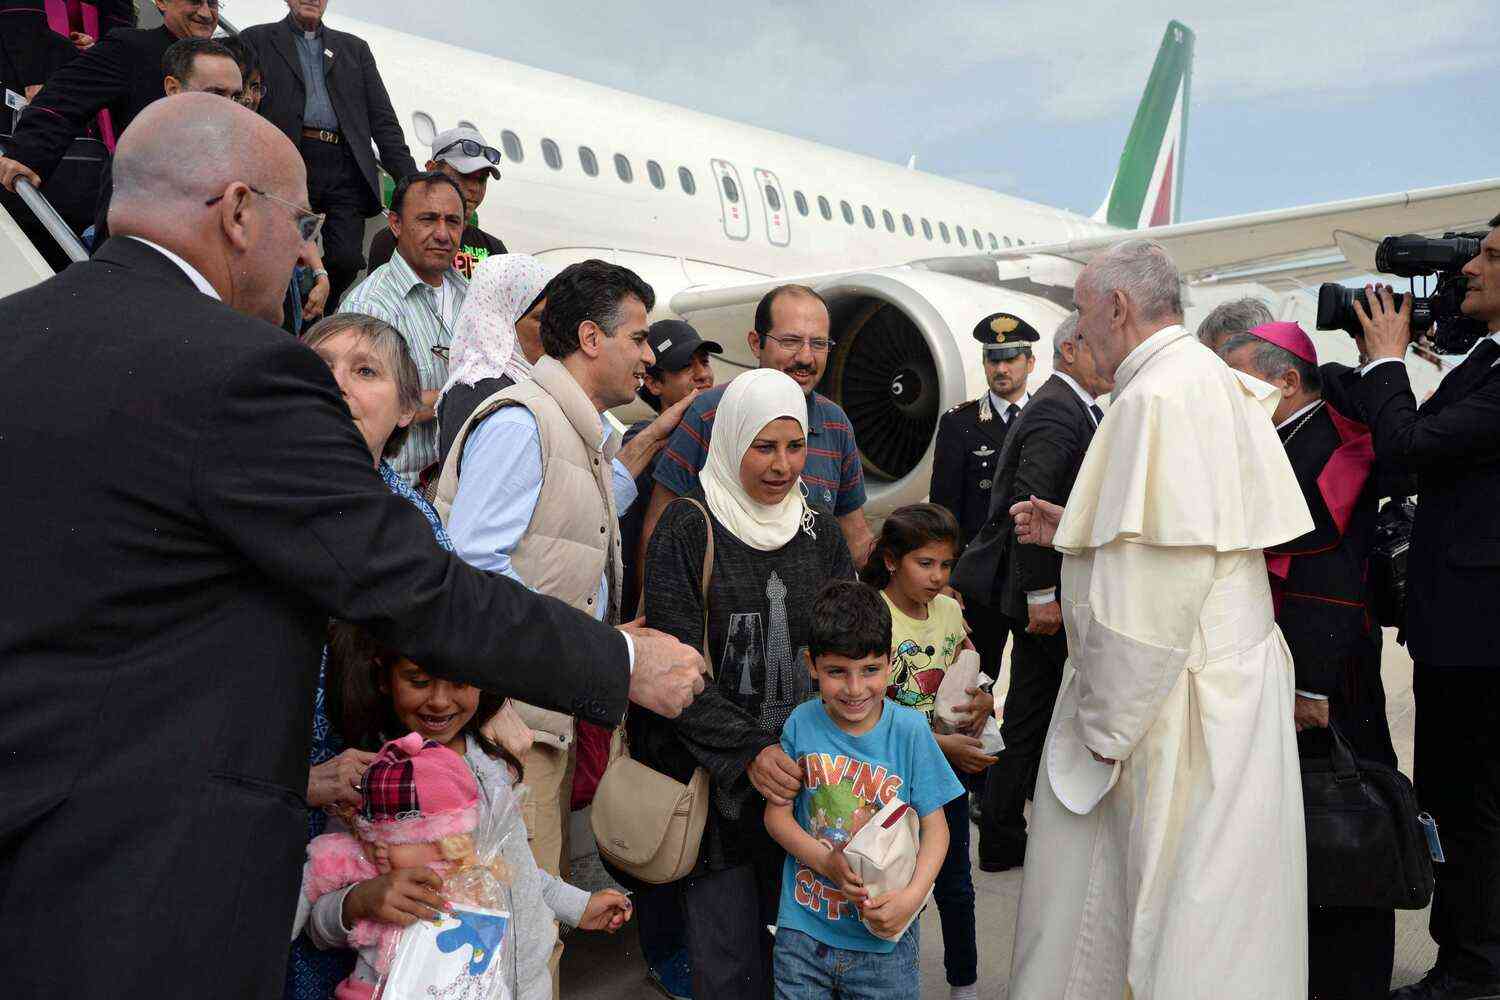 'I’m a citizen of Rome now': Pope Francis's time with refugees contrasts sharply with Rome's